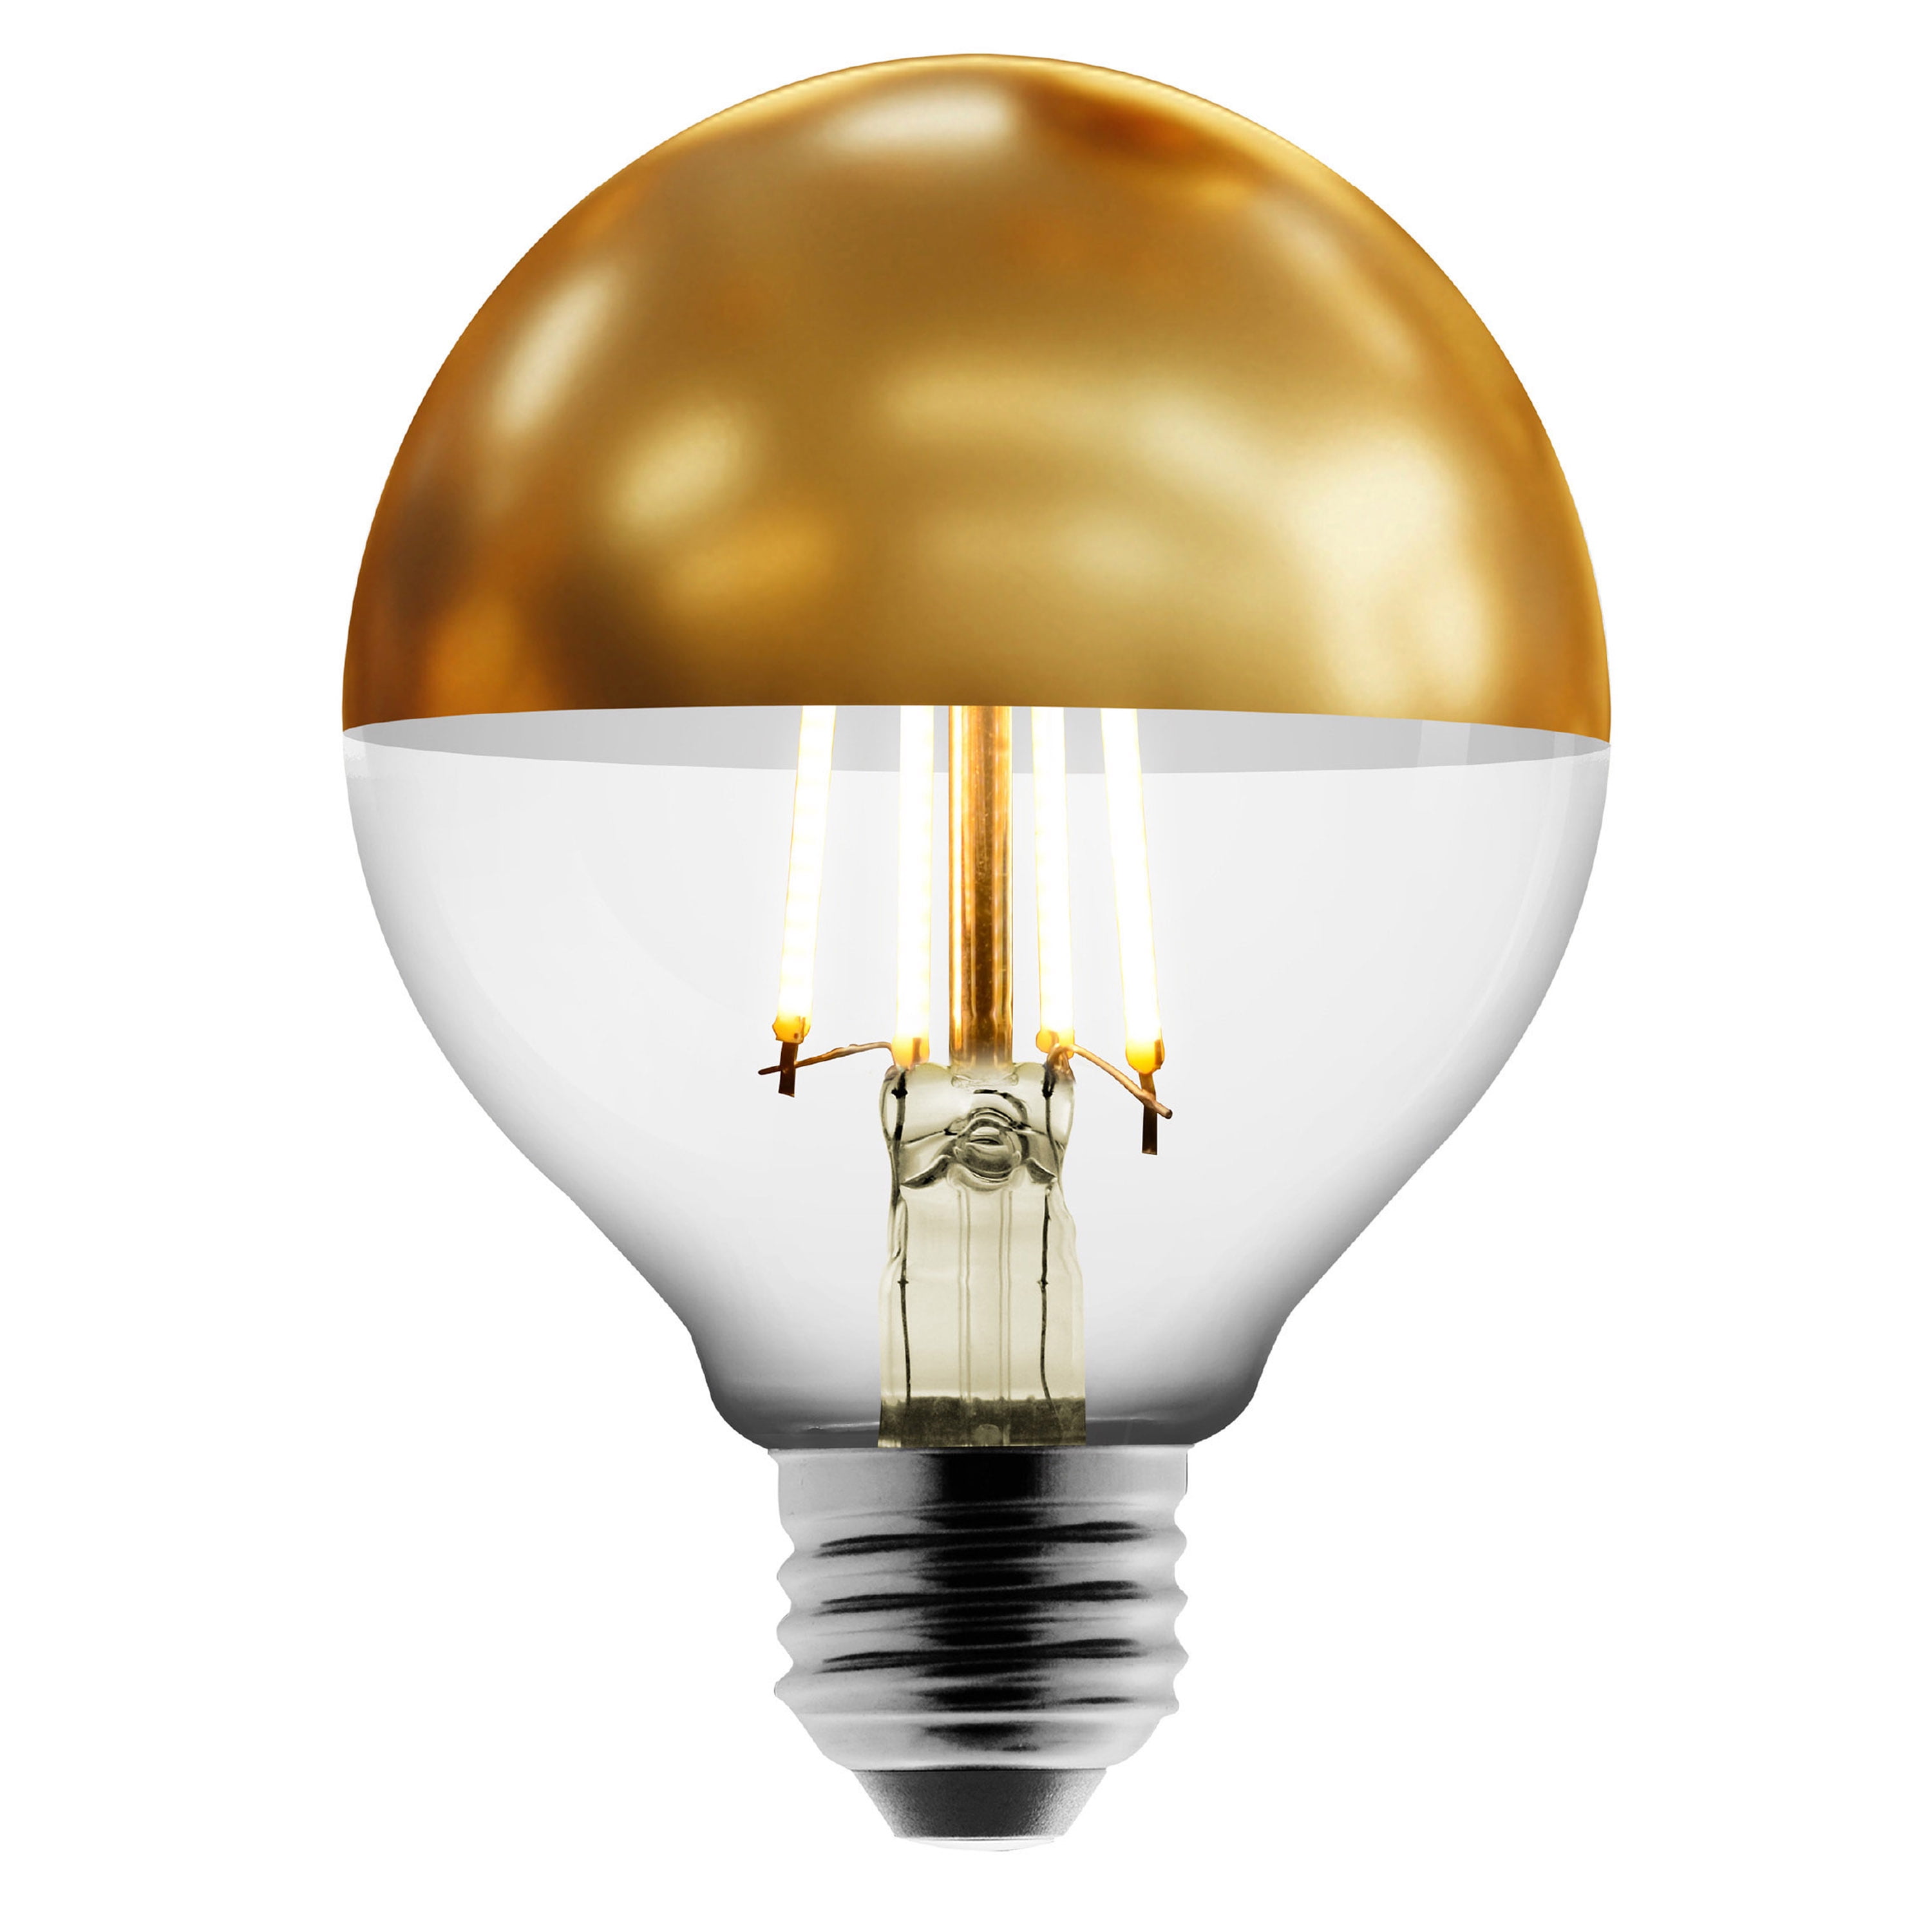 Better Homes & Gardens G25 Gold Dipped Vintage Soft White LED Clear Globe Light Bulb, 60 Watts, Dimmable, Clear Finish - 2 Pack